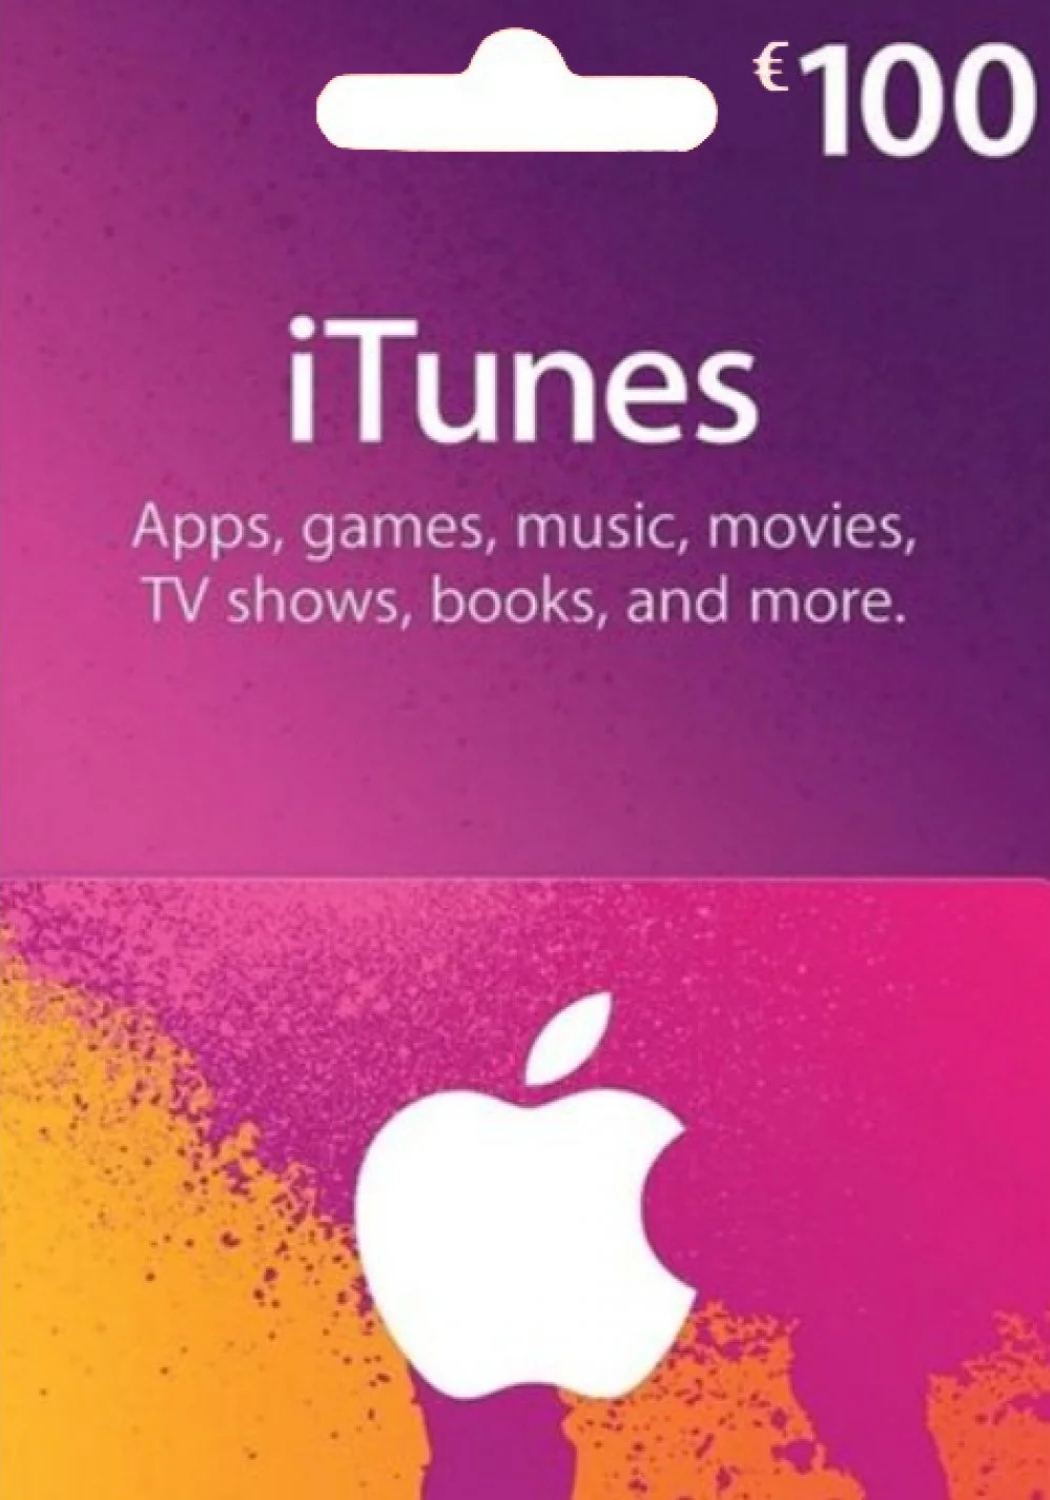 iTunes 100 EUR Gift Card | Italy Account digital